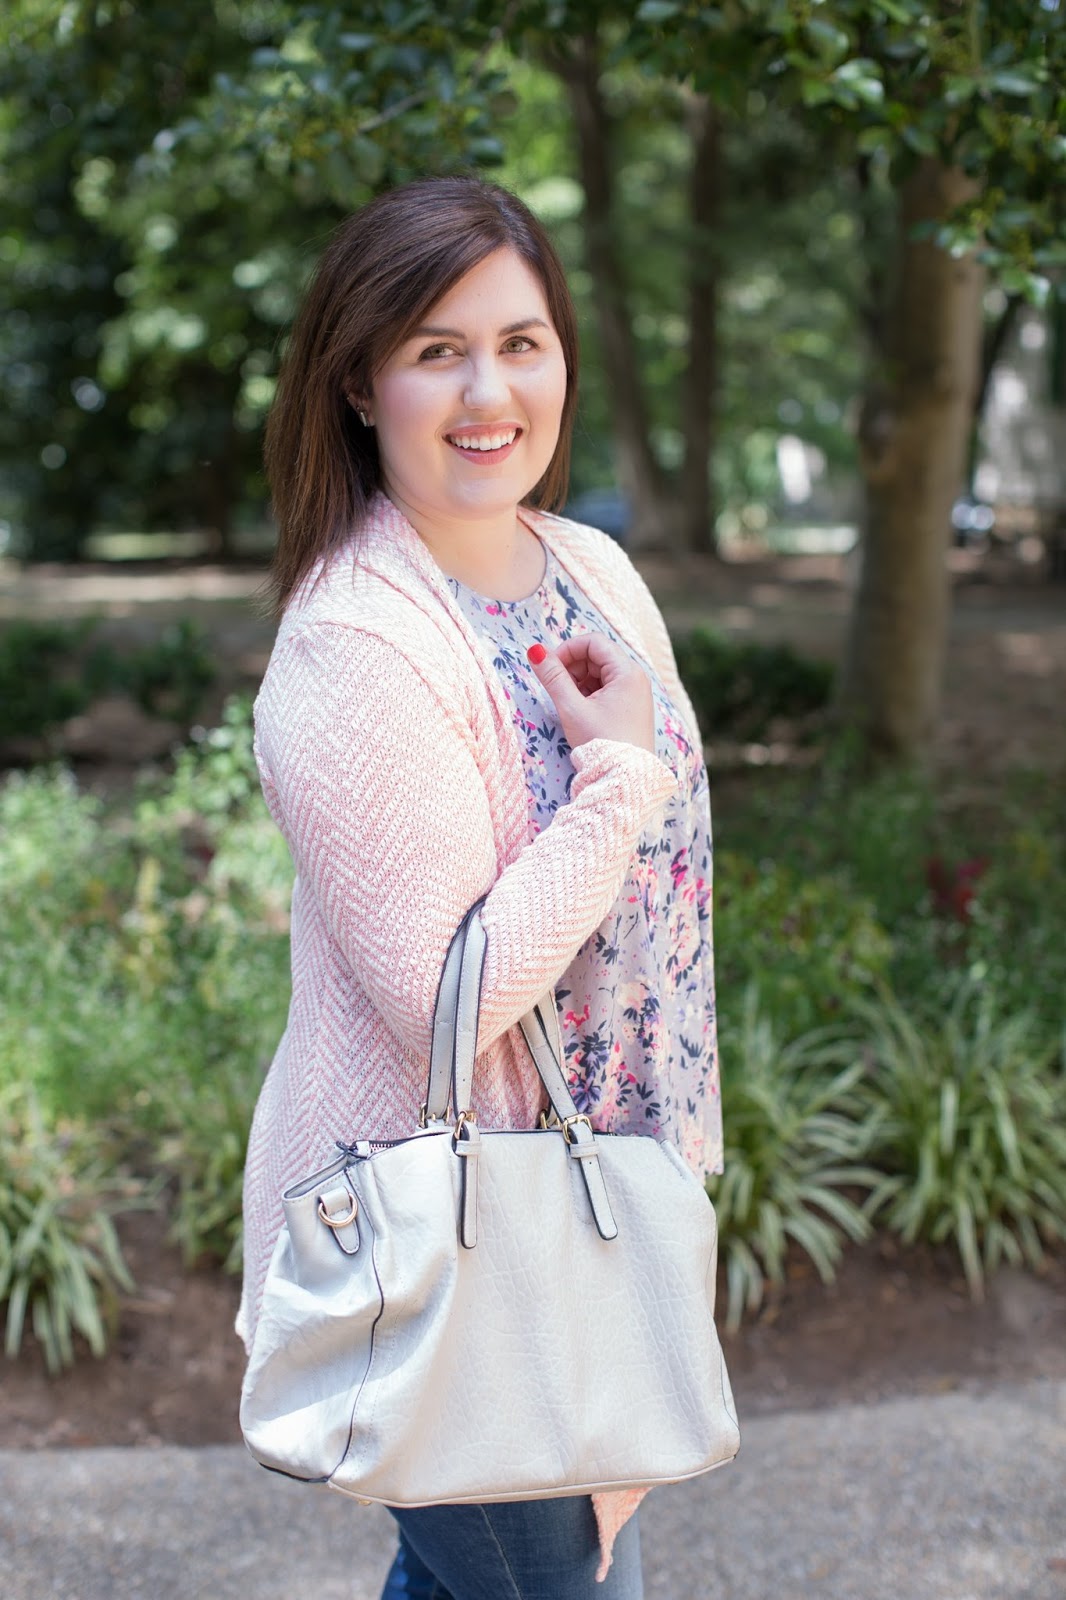 Rebecca Lately Floral Top Pink Chevron Cardigan Old Navy Rockstar Jeans Navy Wedges